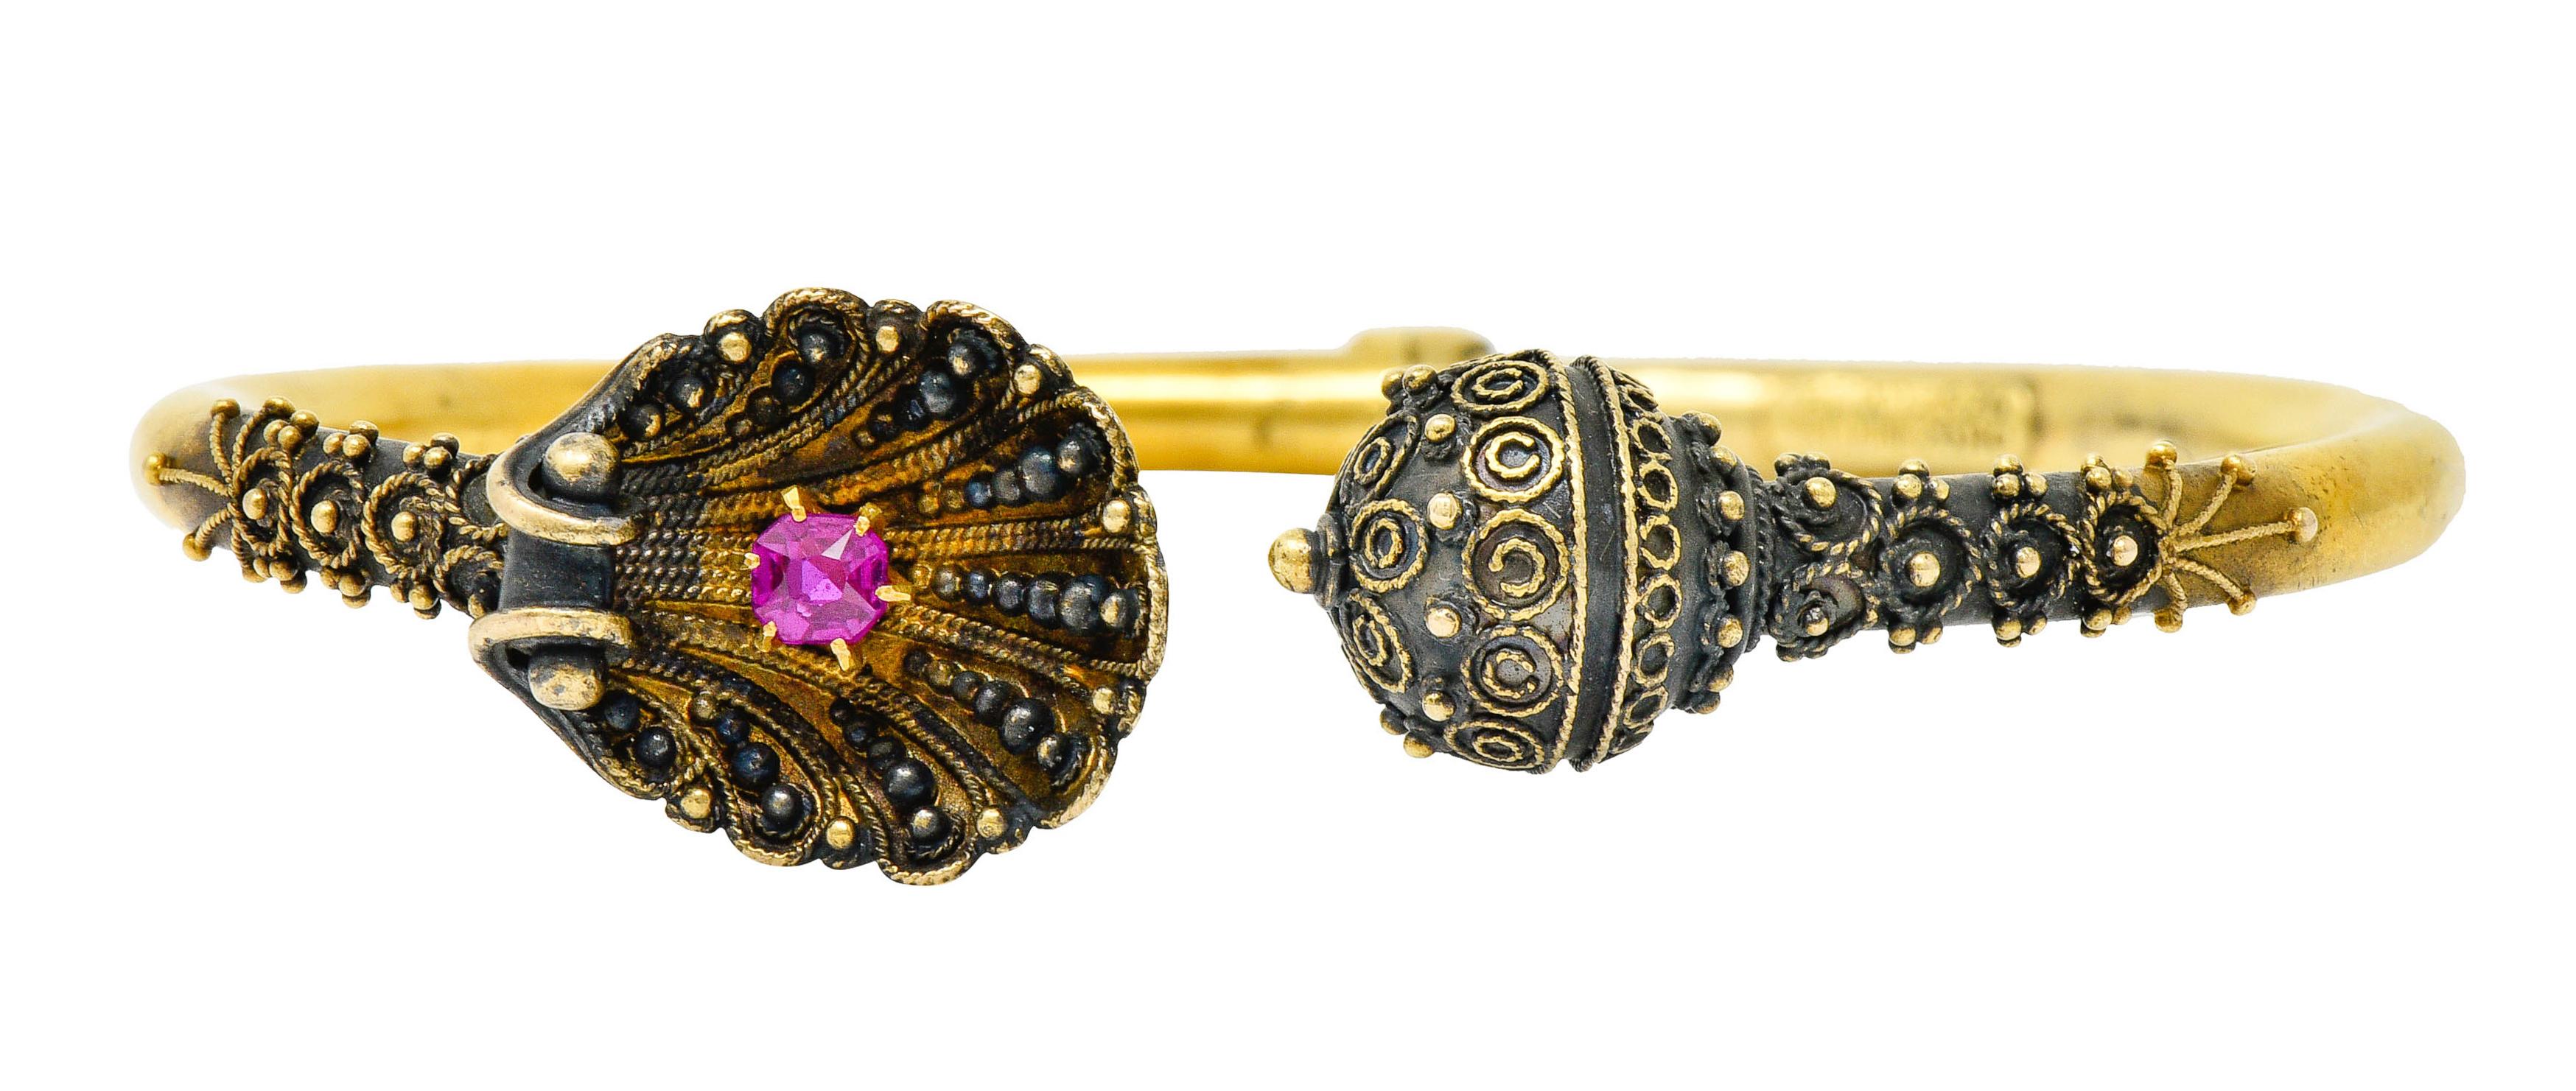 Hinged bangle bracelet terminating as a decorative ball opposite of a cupped clamshell

Both terminals are oxidized with gold beading and twisted rope details

Shell features a talon set cushion cut ruby weighing approximately 0.36 carat;